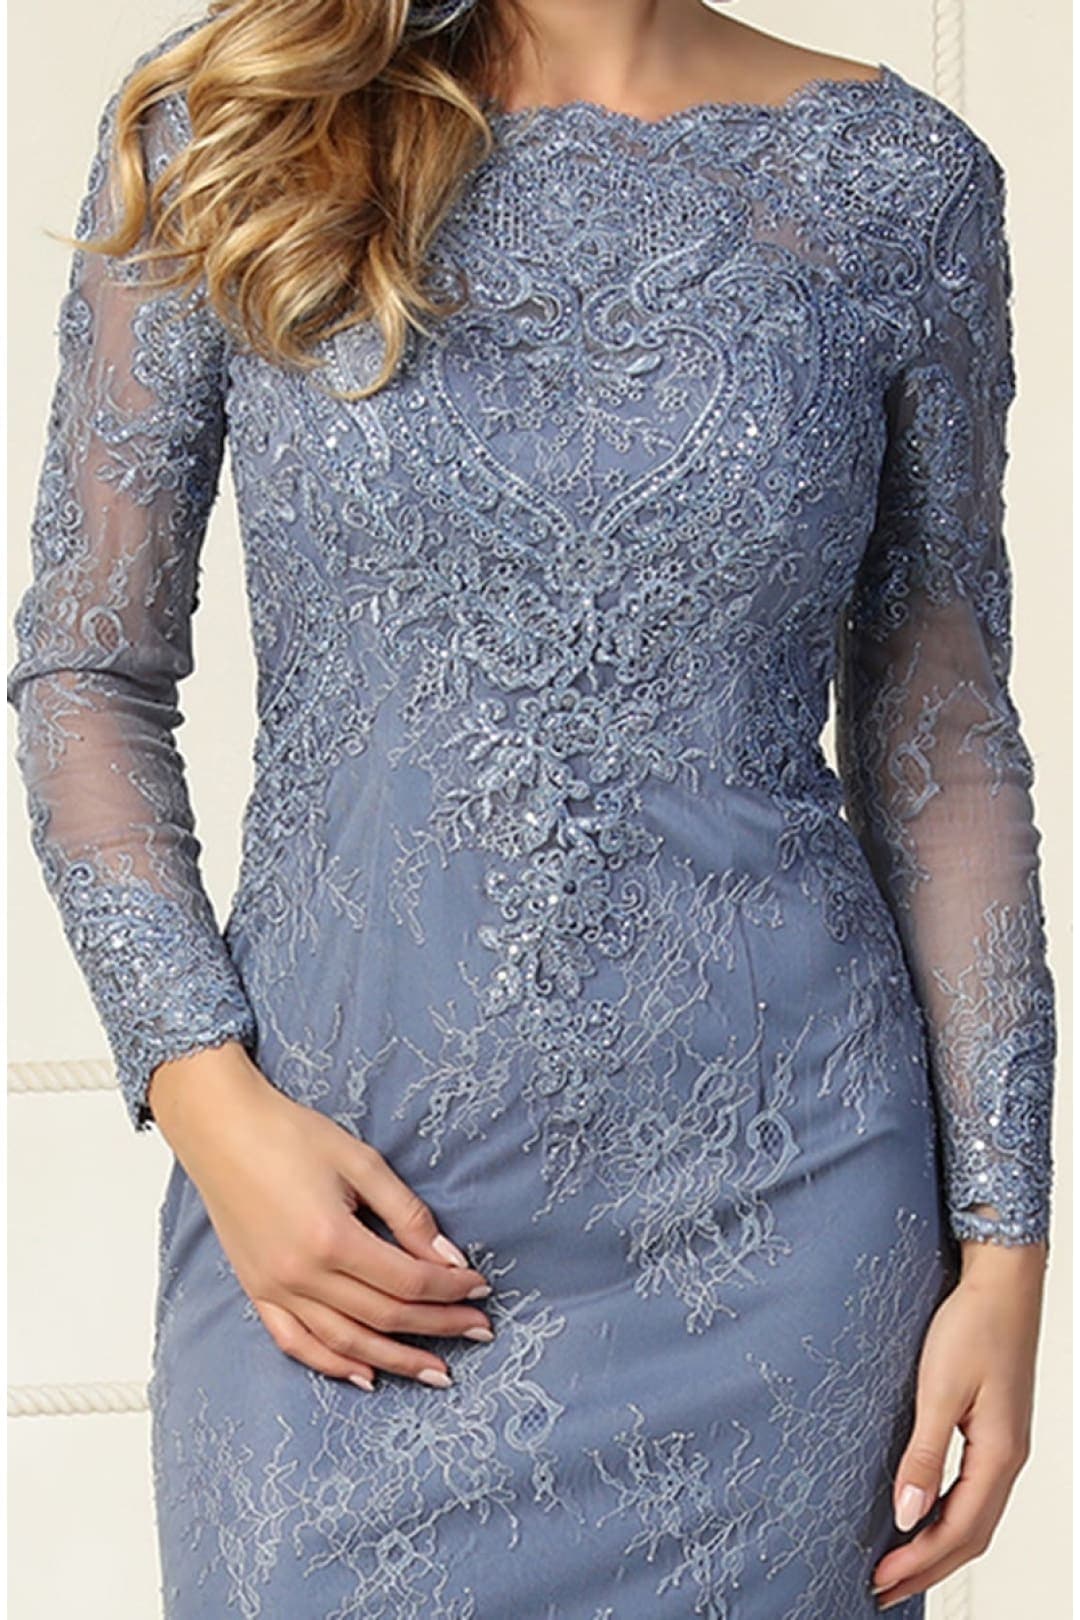 Lace Embroidered Evening Gown